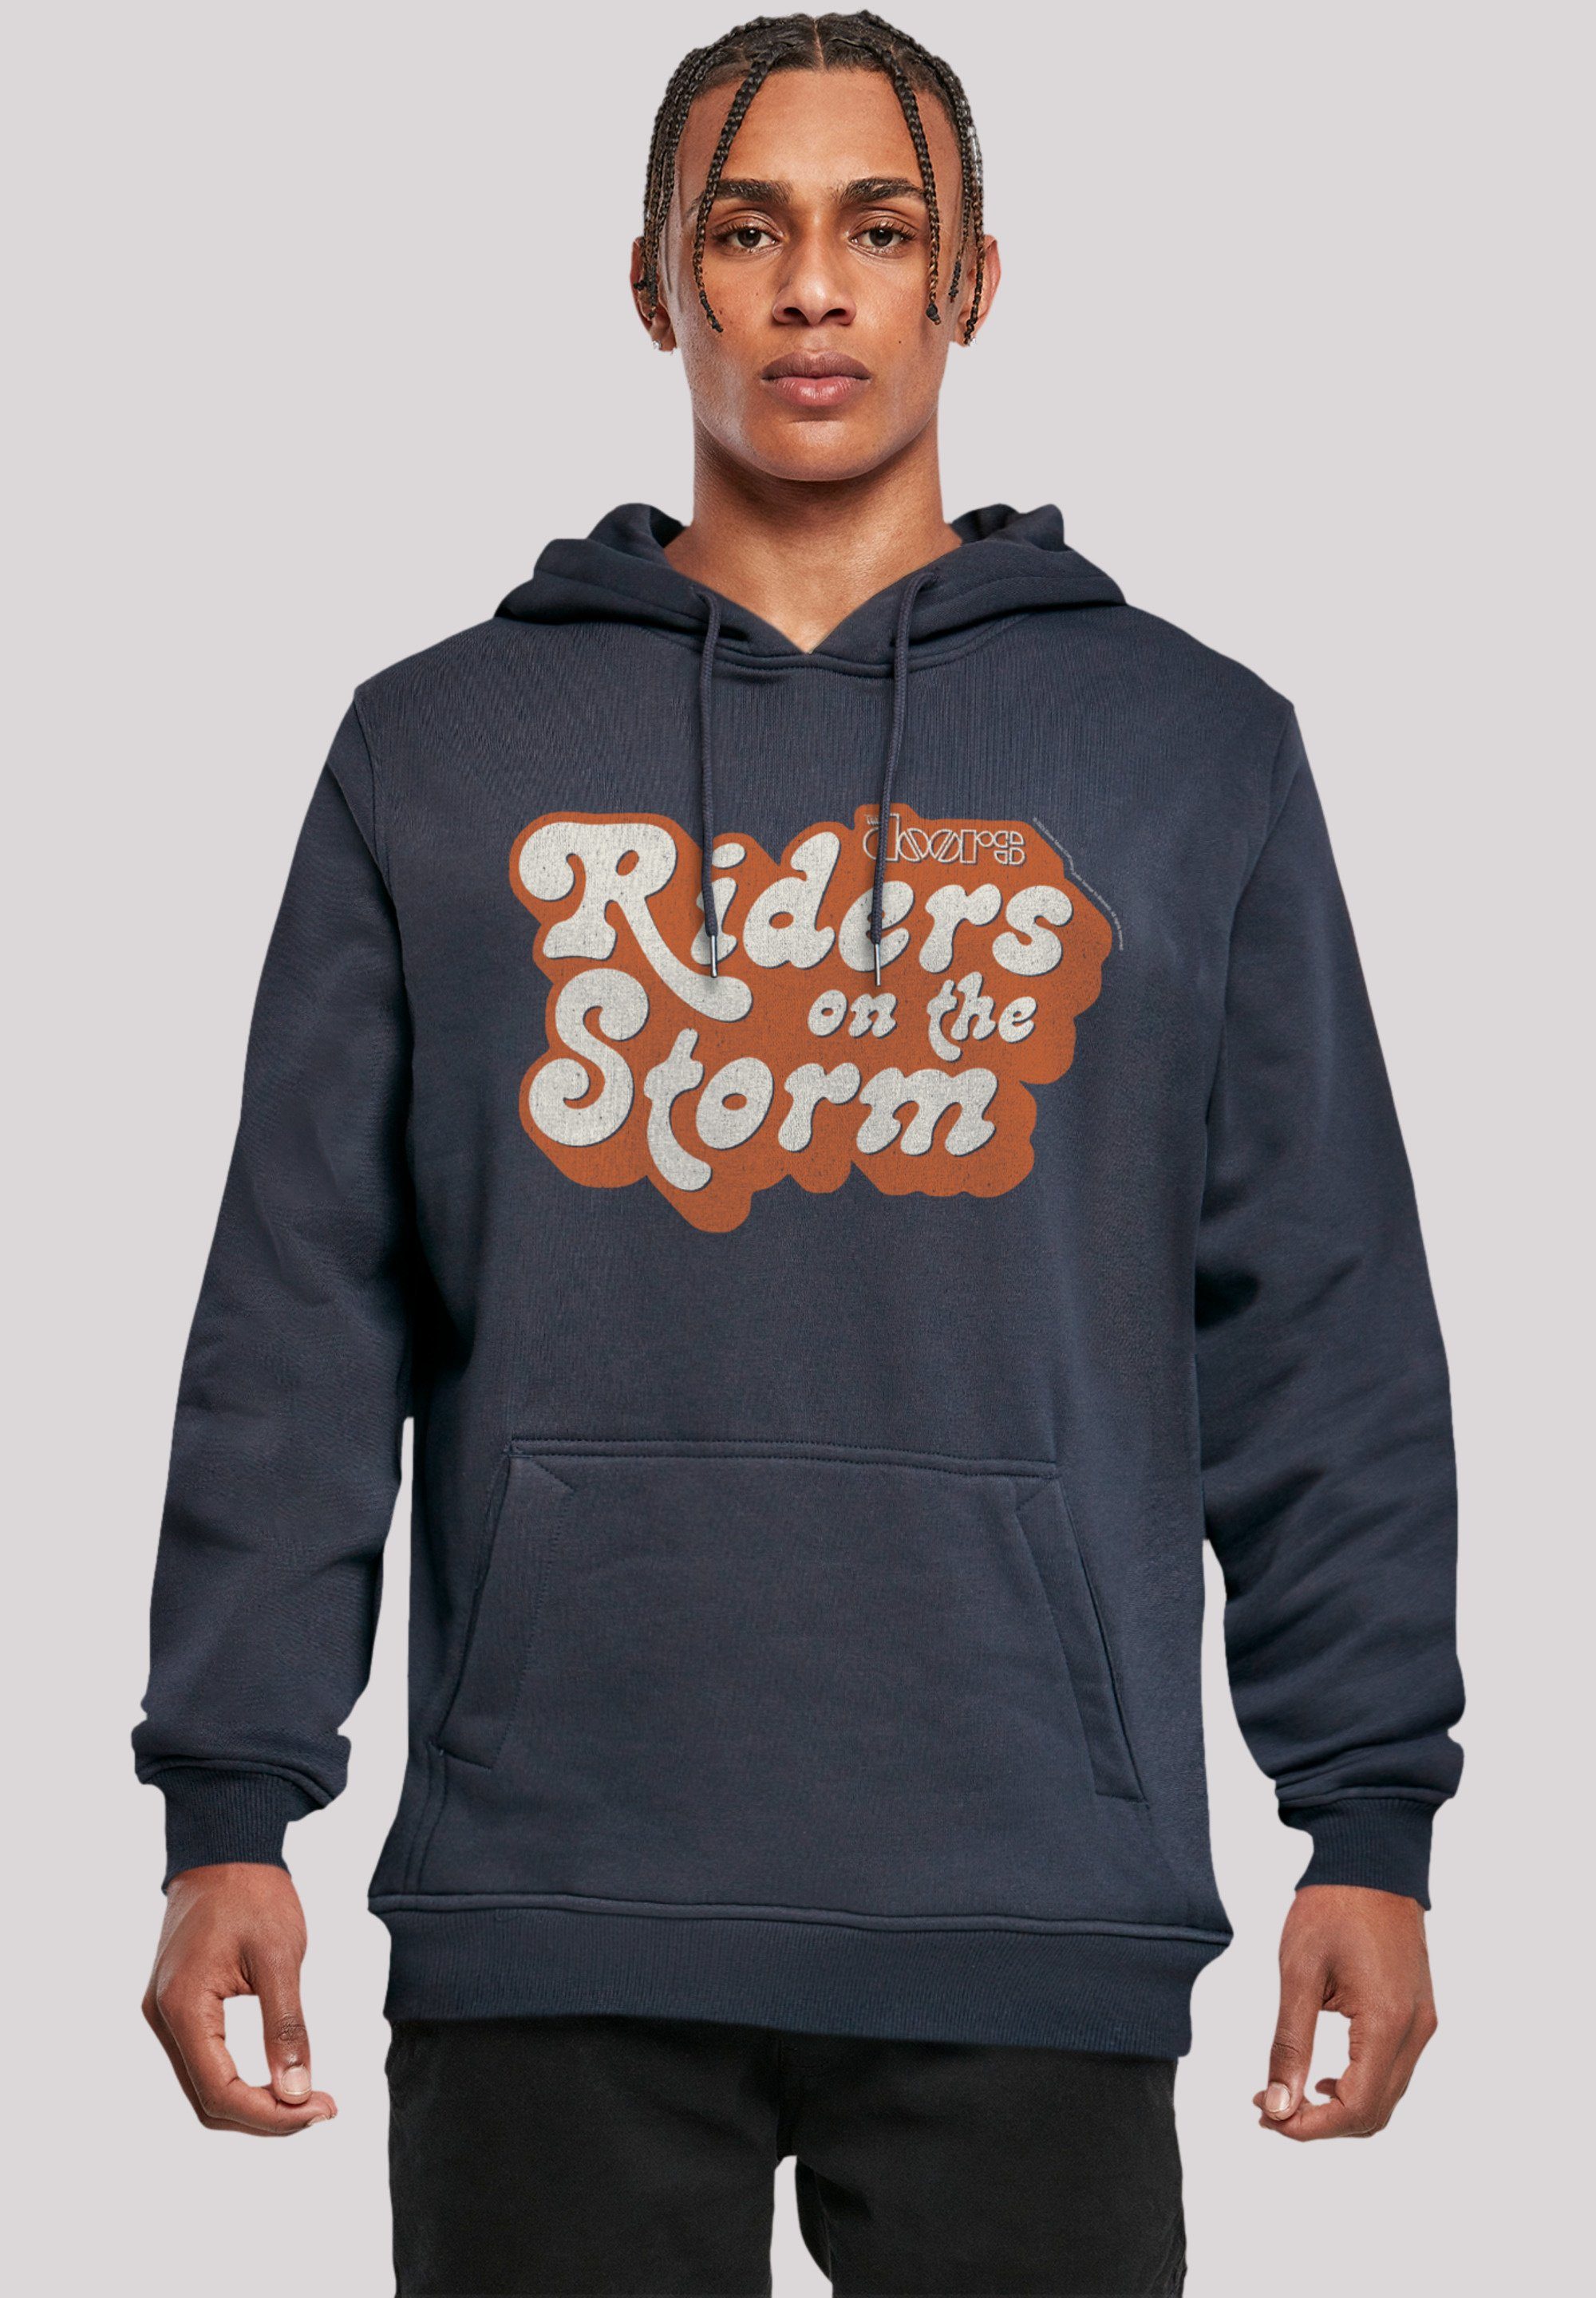 Music Premium the Band on Band, F4NT4STIC Qualität, Storm The Hoodie navy Riders Logo Logo Doors